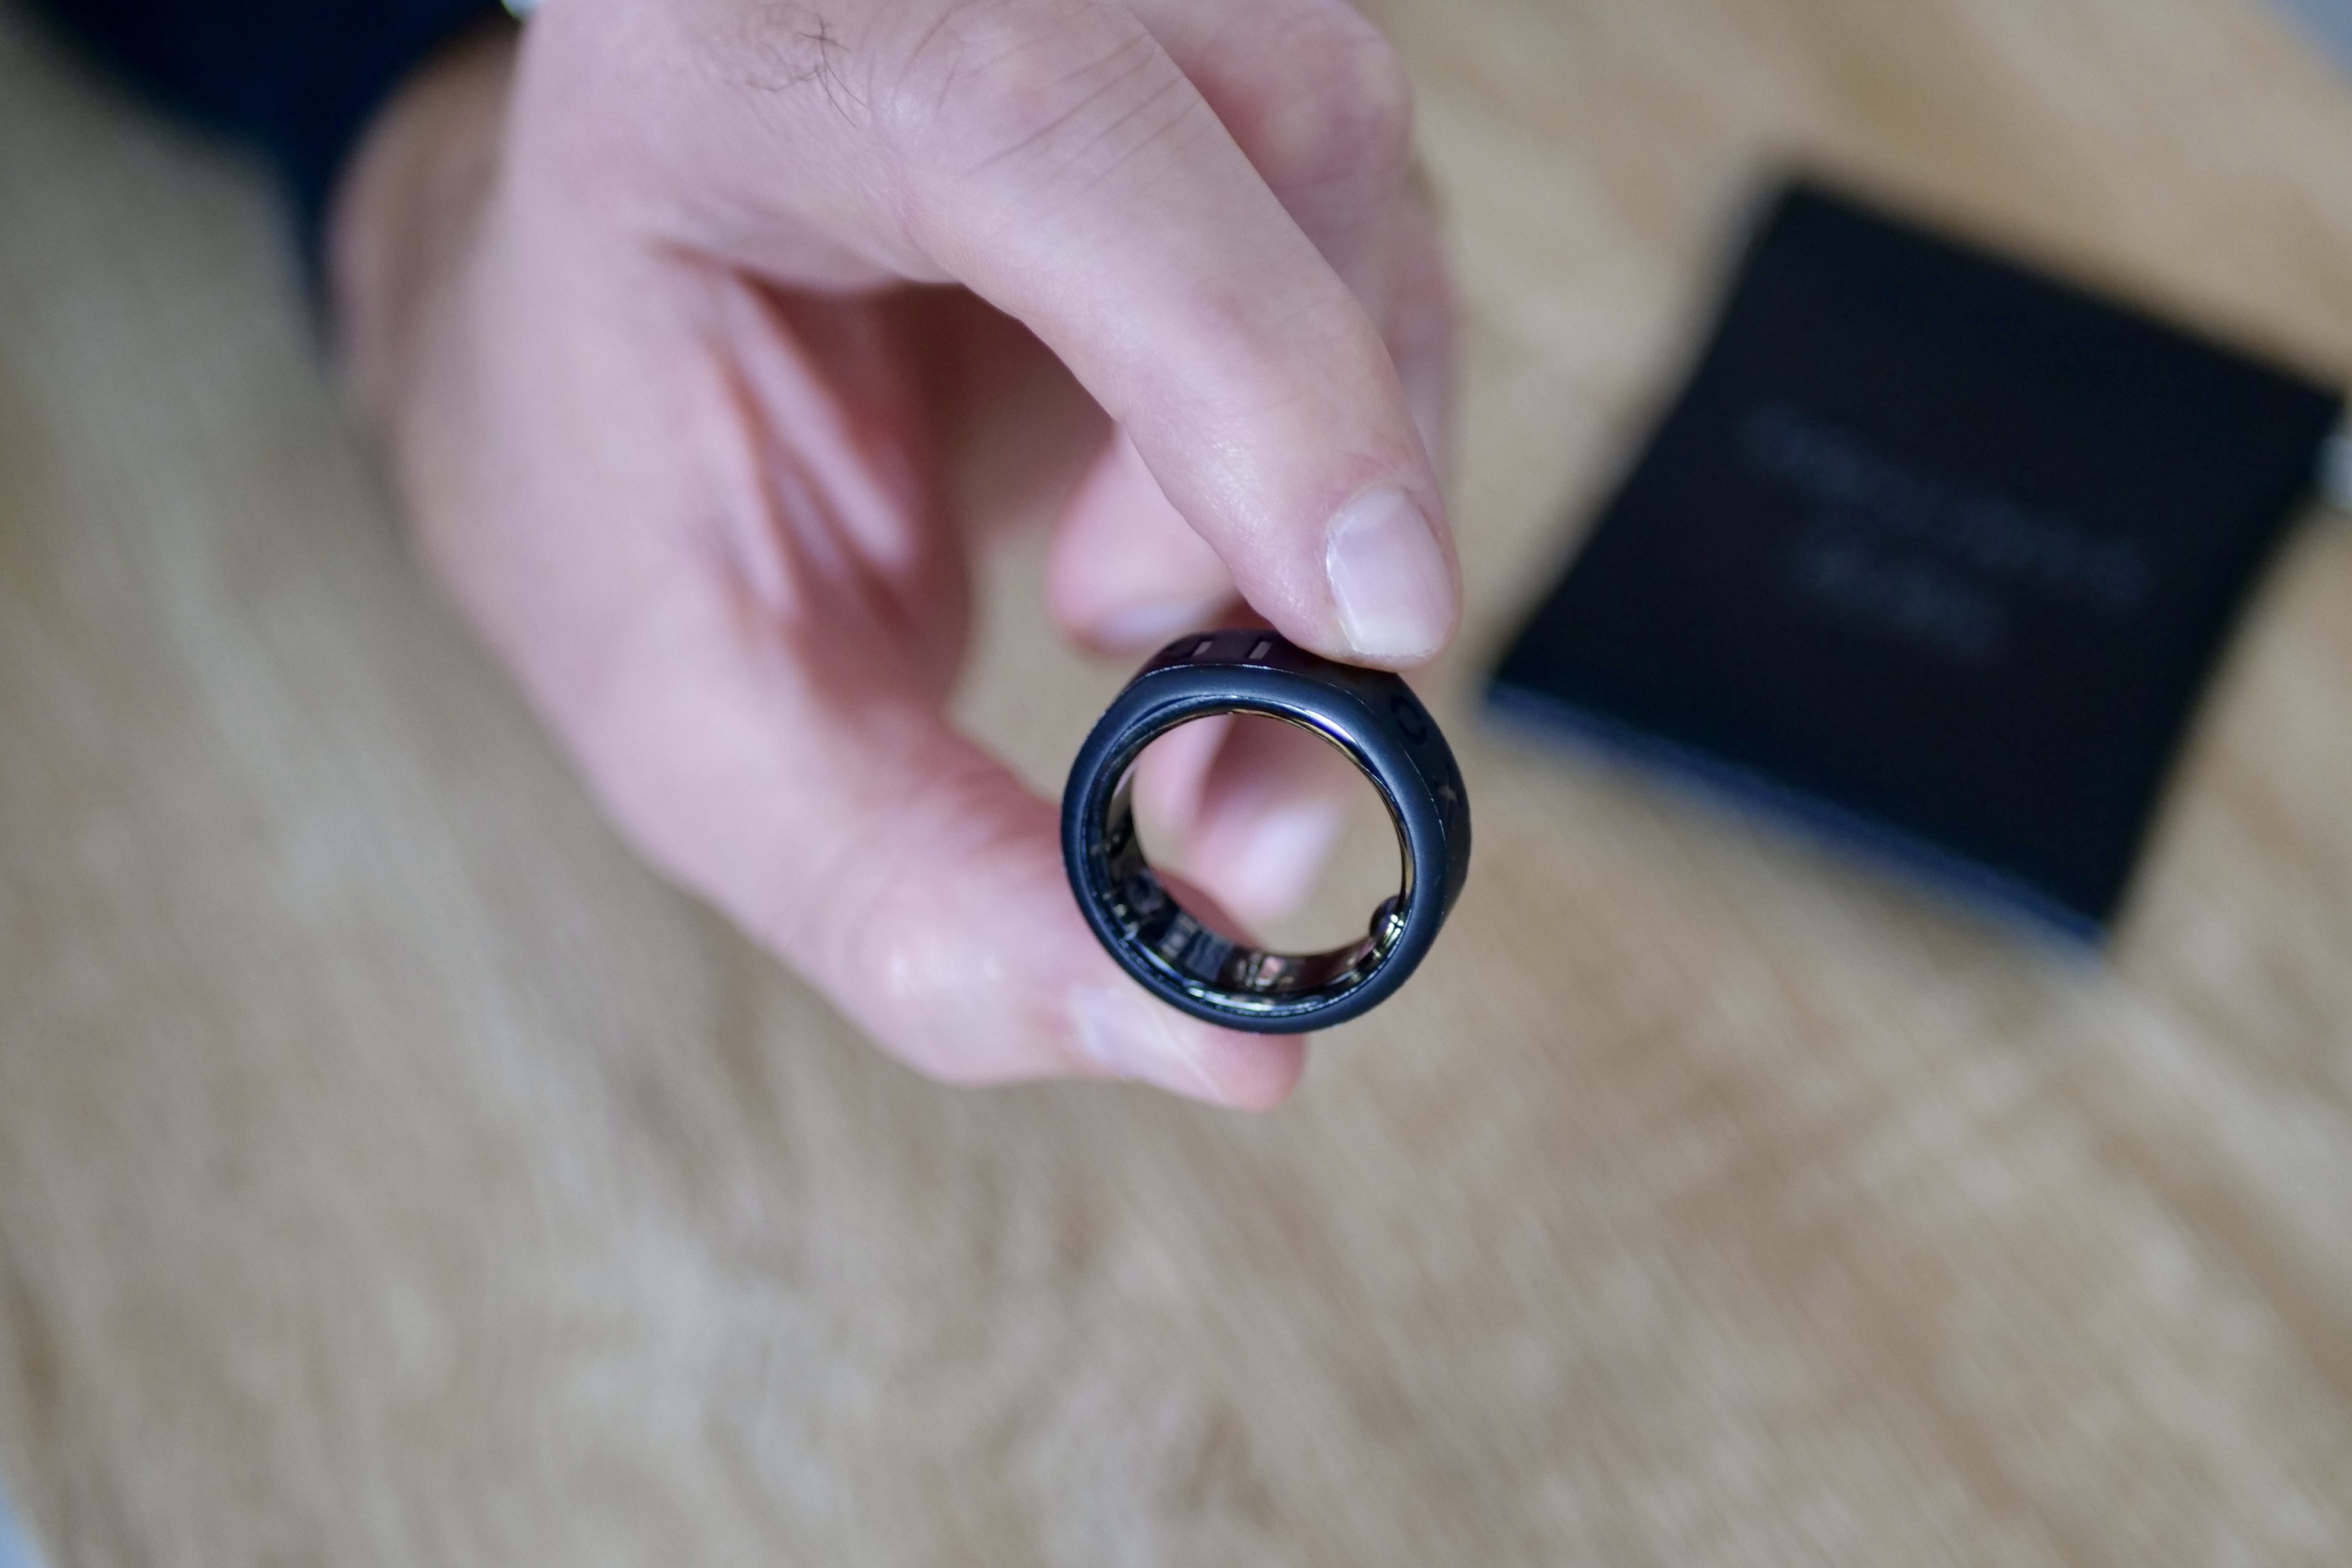 Oura Ring Covers? For lifting weights : r/ouraring